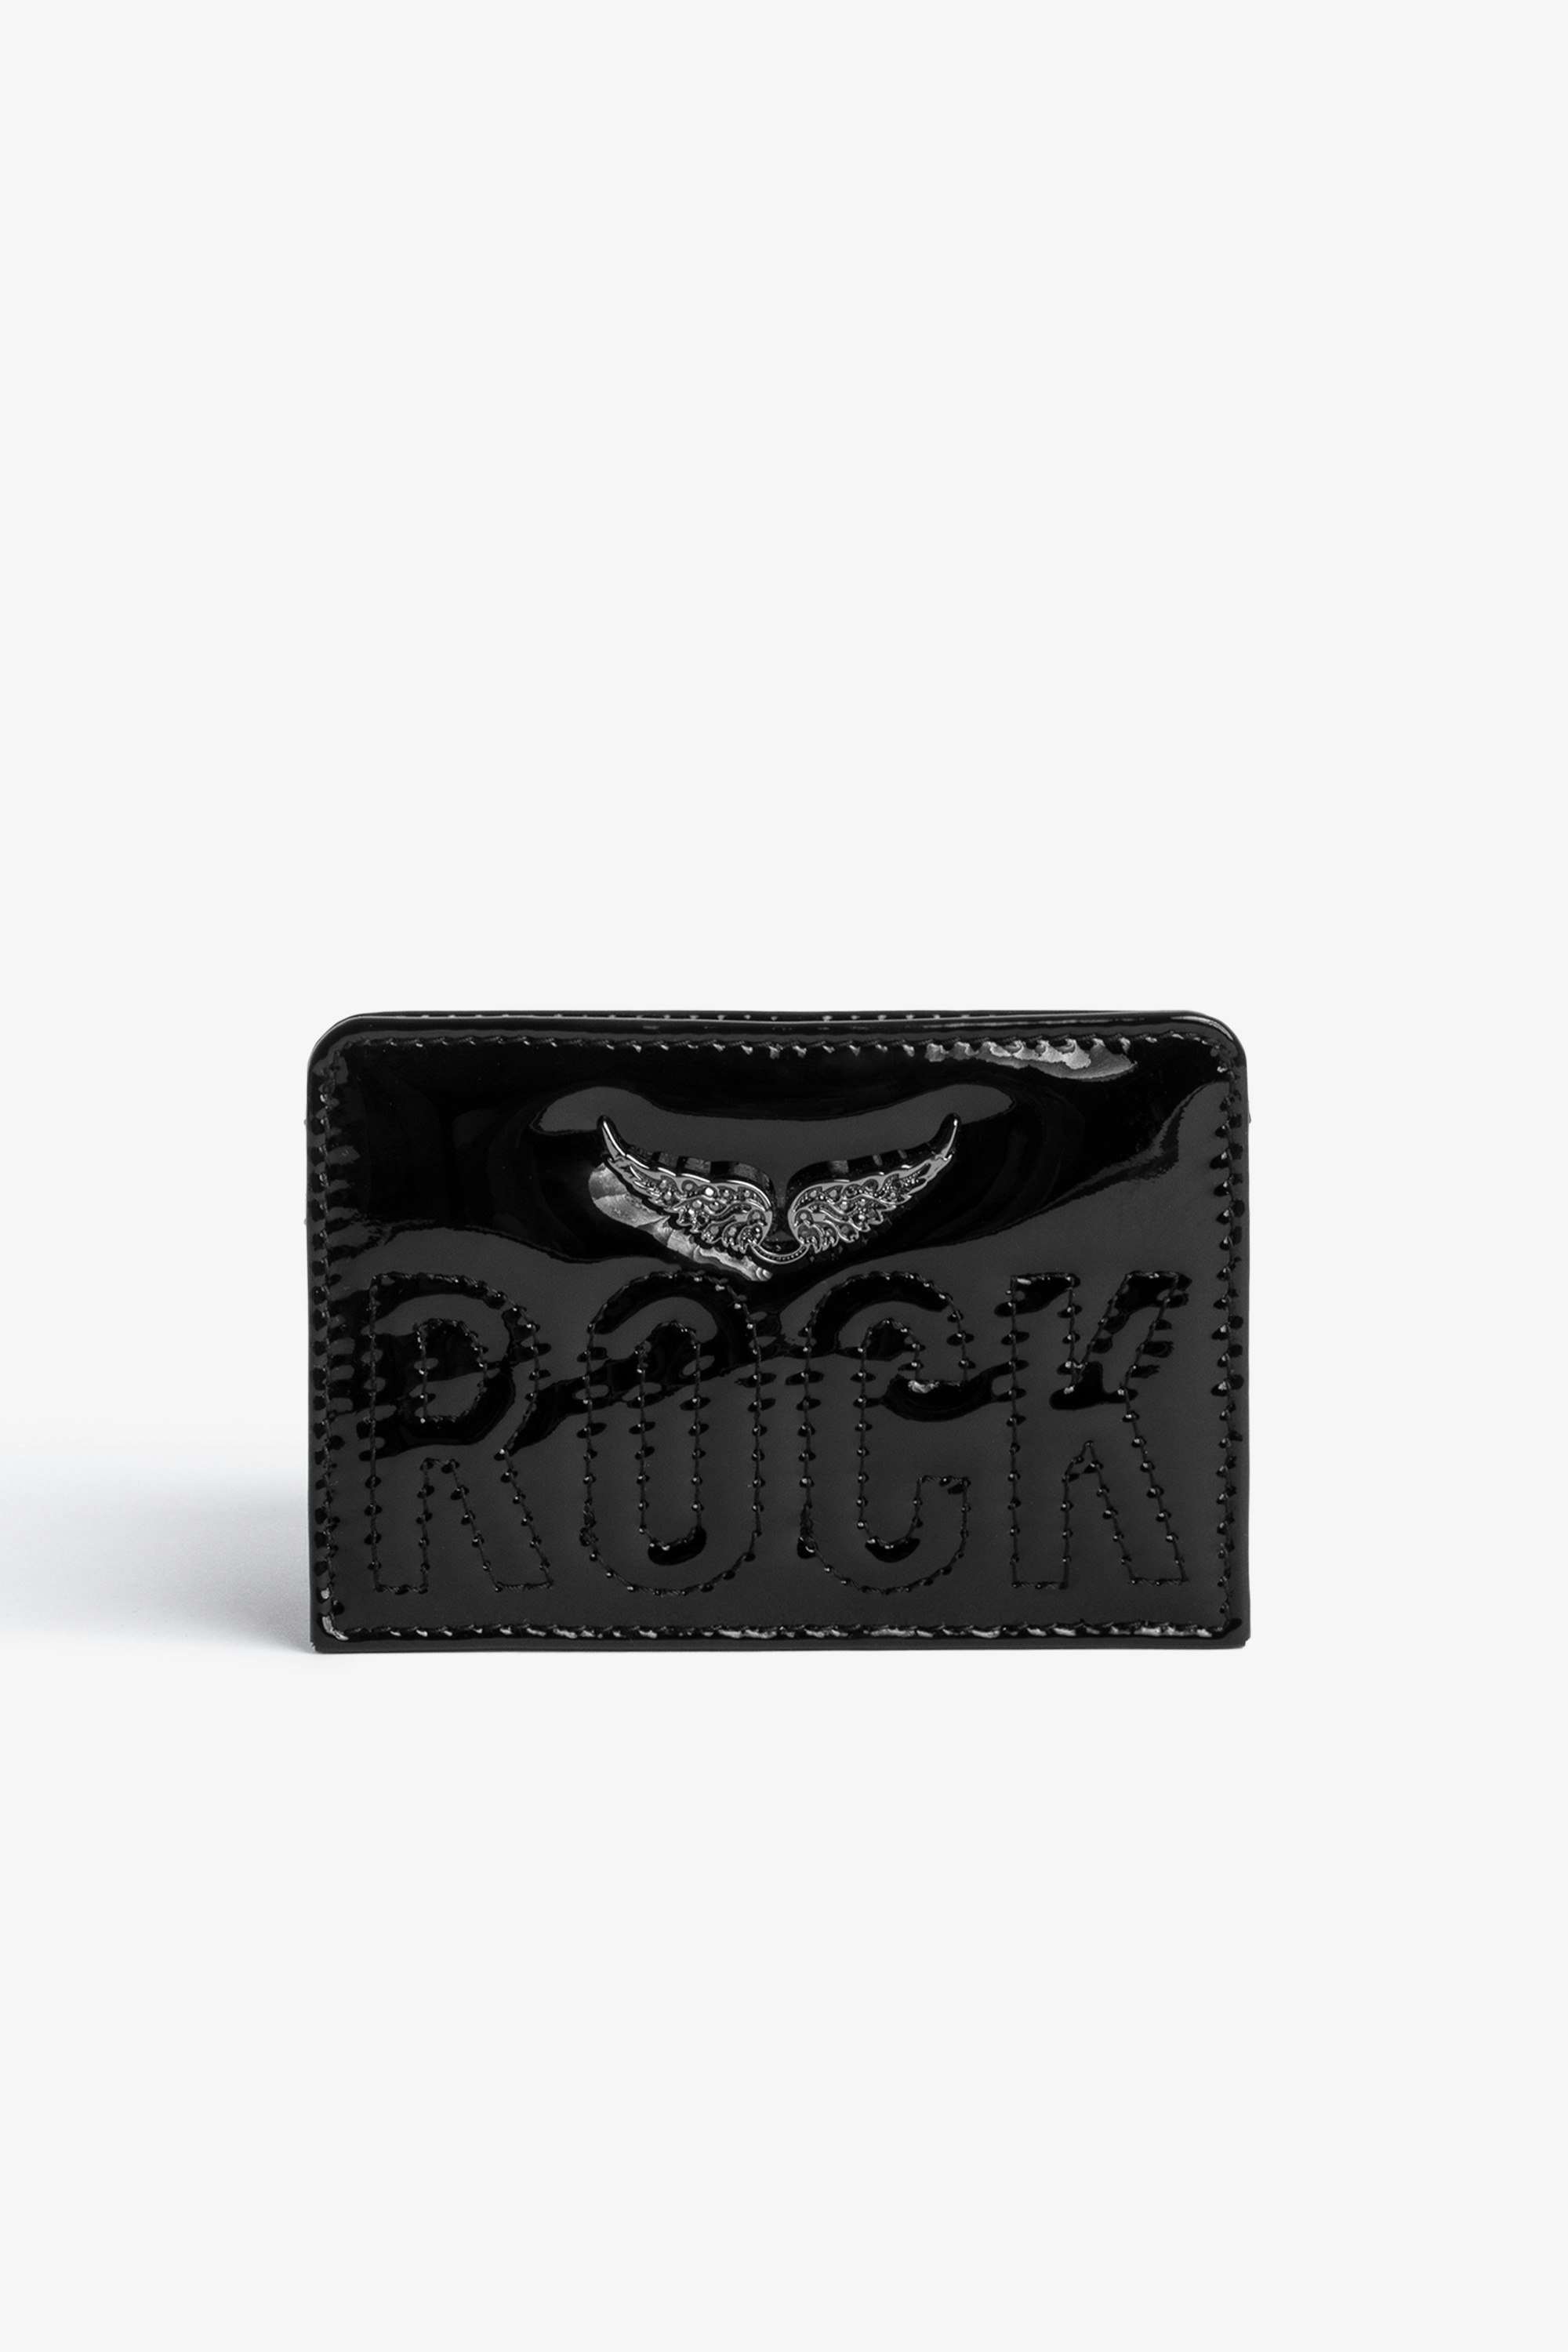 ZV Pass Card Holder Women’s black patent leather card holder with topstitched “Rock” slogan and crystal-set wings charm